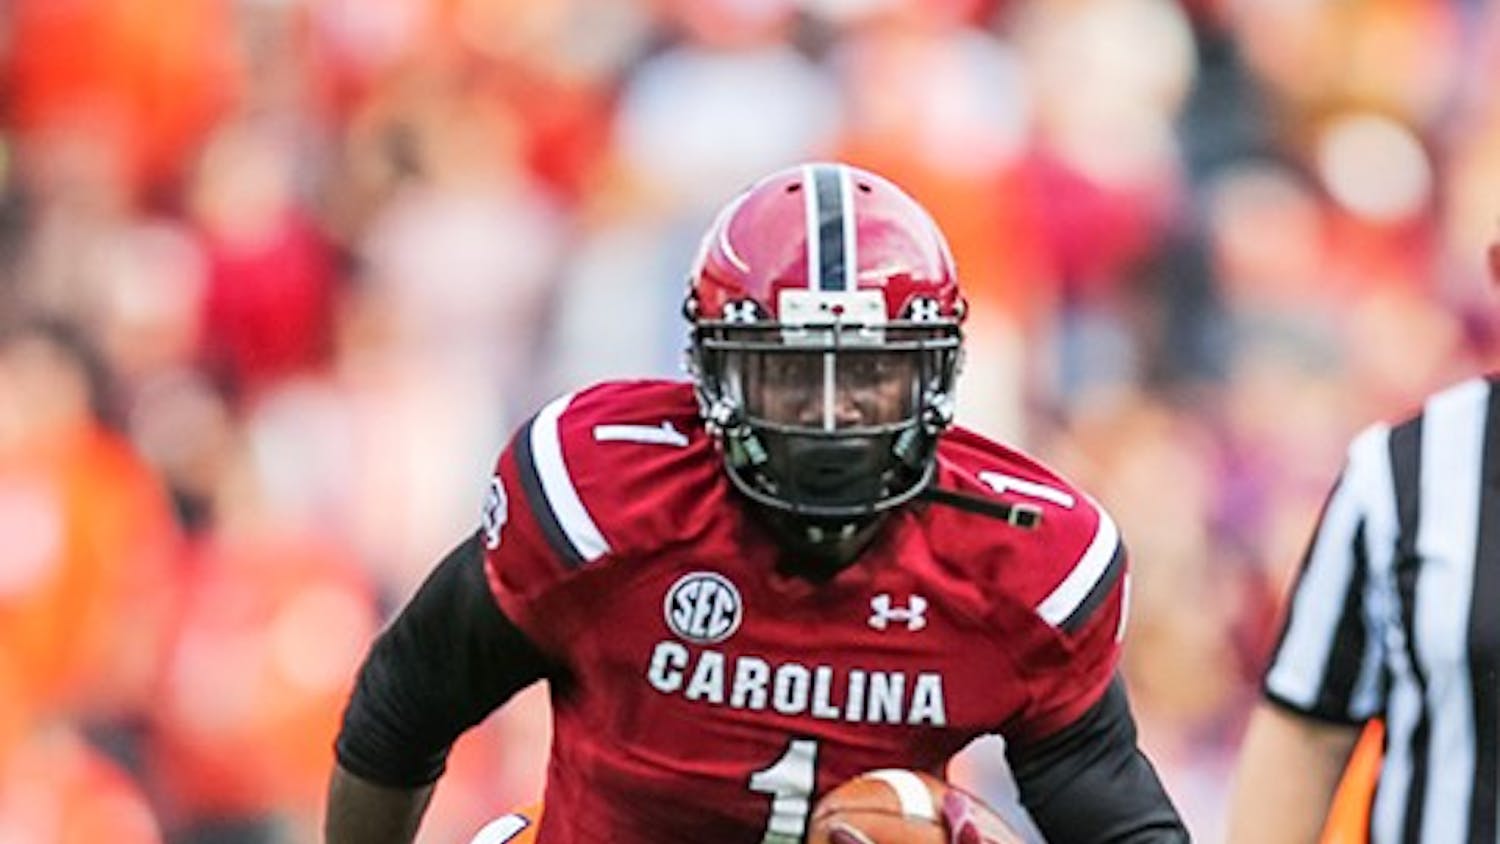 Deebo Samuel will look to take a step forward in 2016 as one of South Carolina's primary receivers.